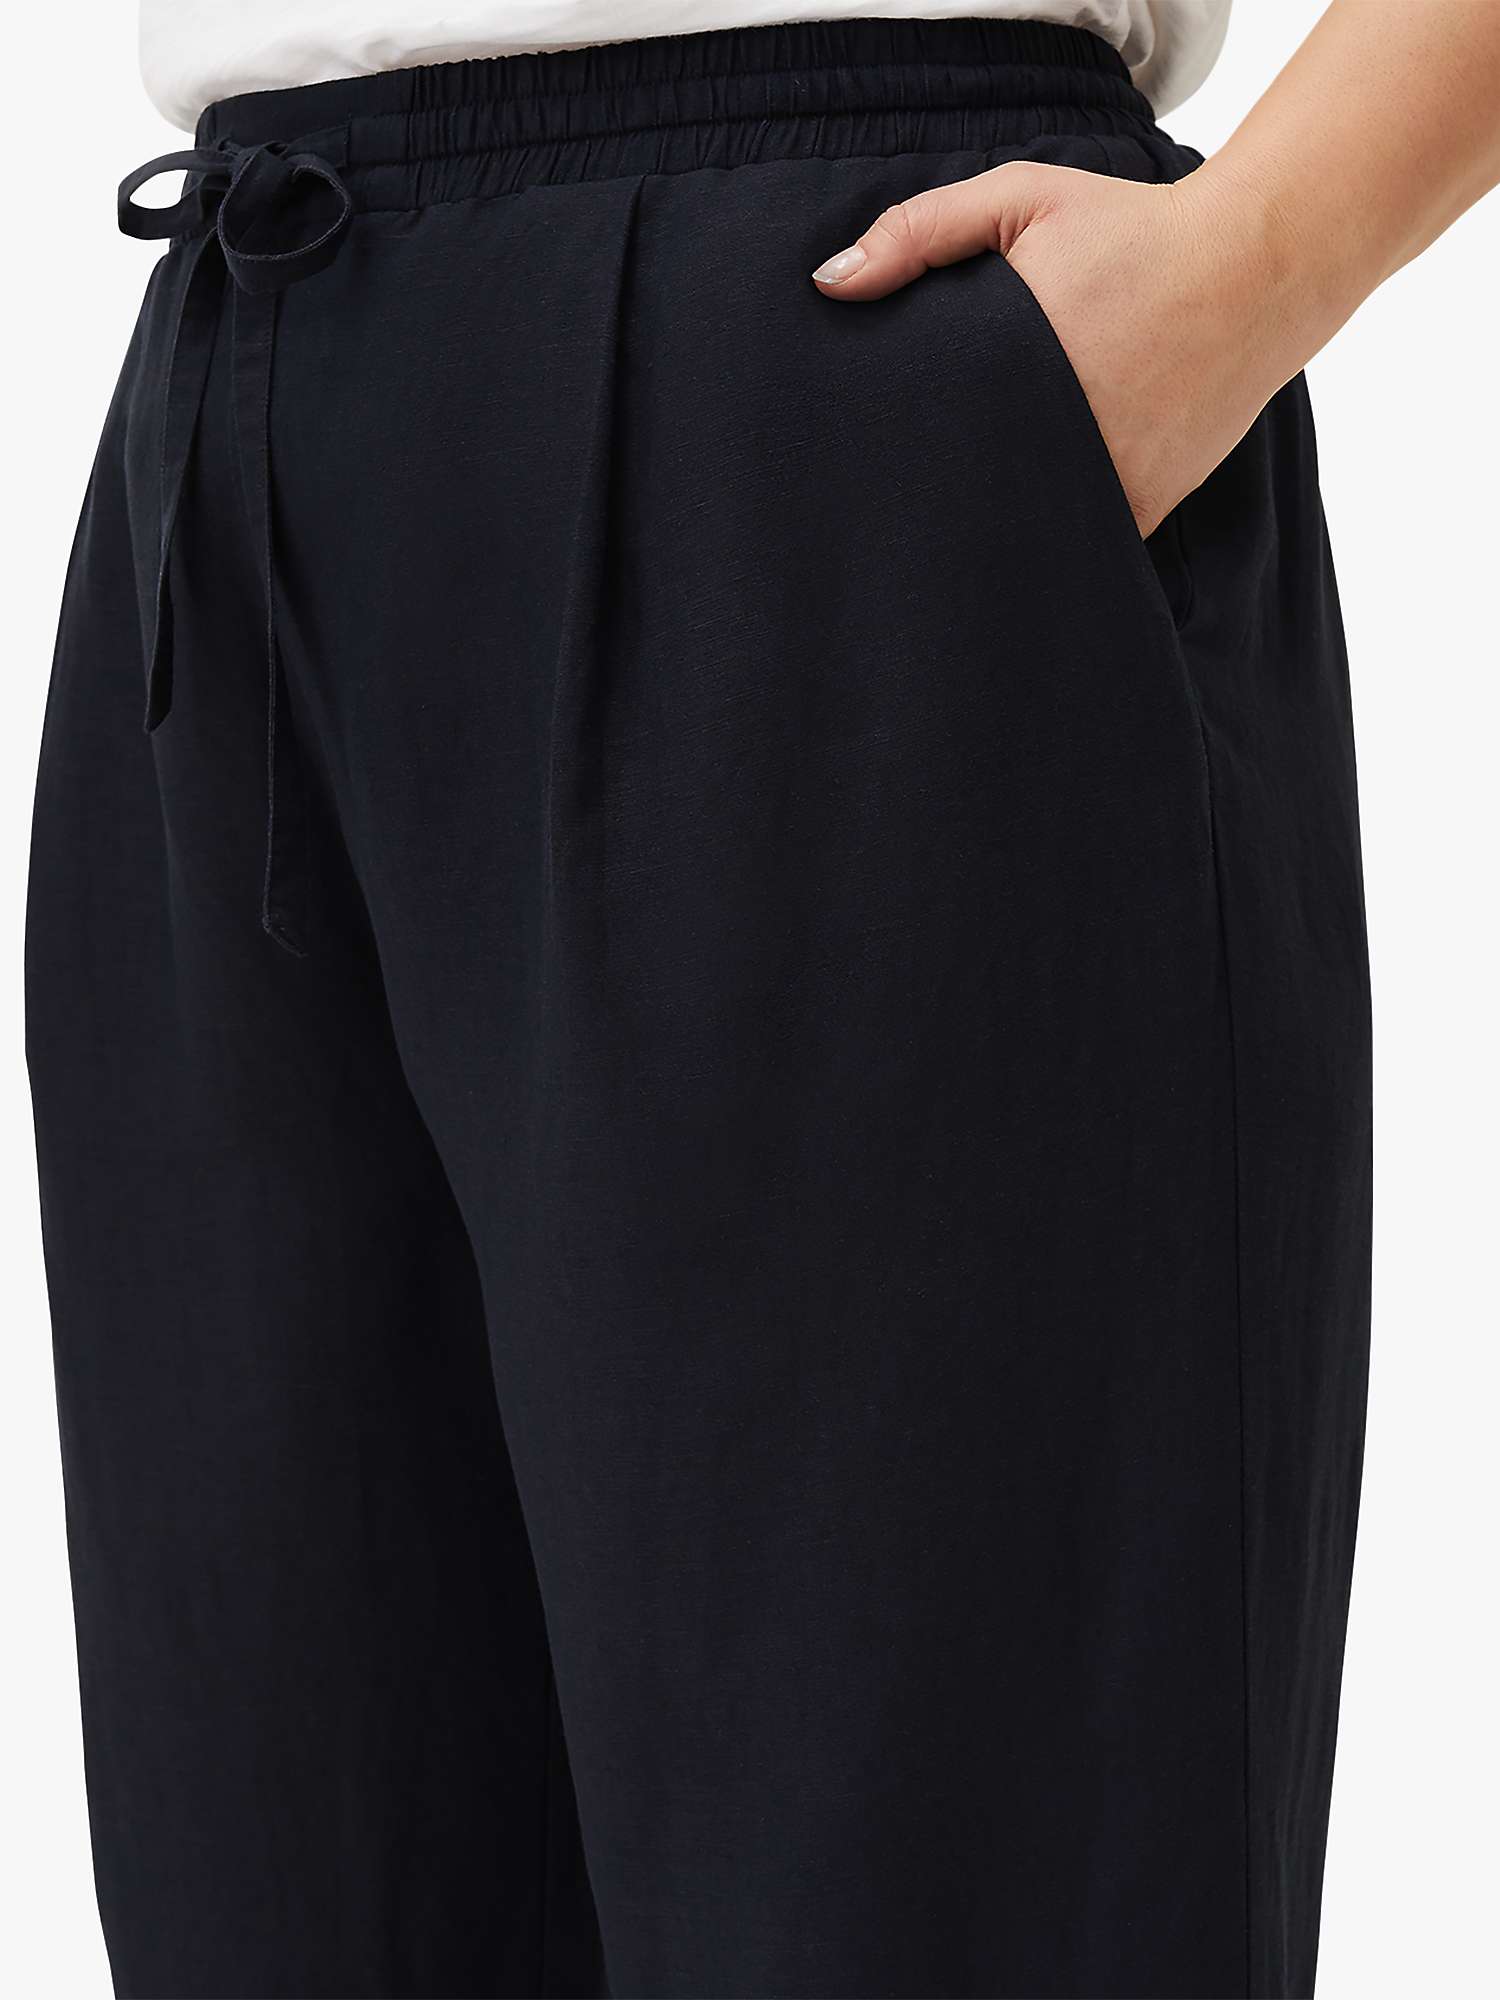 Buy Studio 8 Bethany Trousers, Navy Online at johnlewis.com